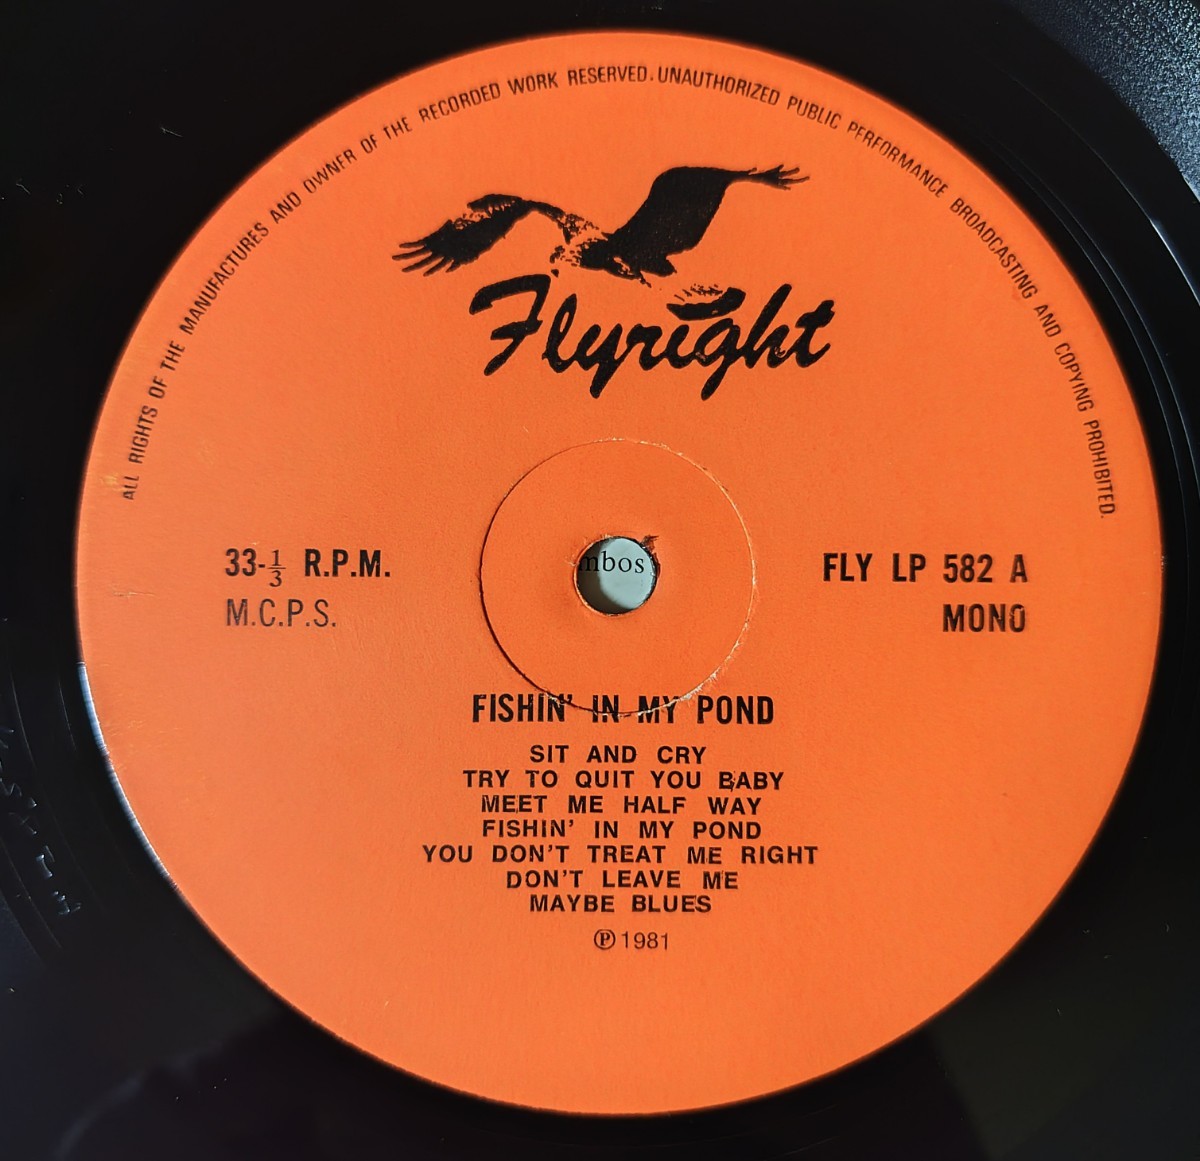 Fishin\' In My Pond (Chicago Blues Bands)Flyright Records FLY 5821981 year Britain monaural record 